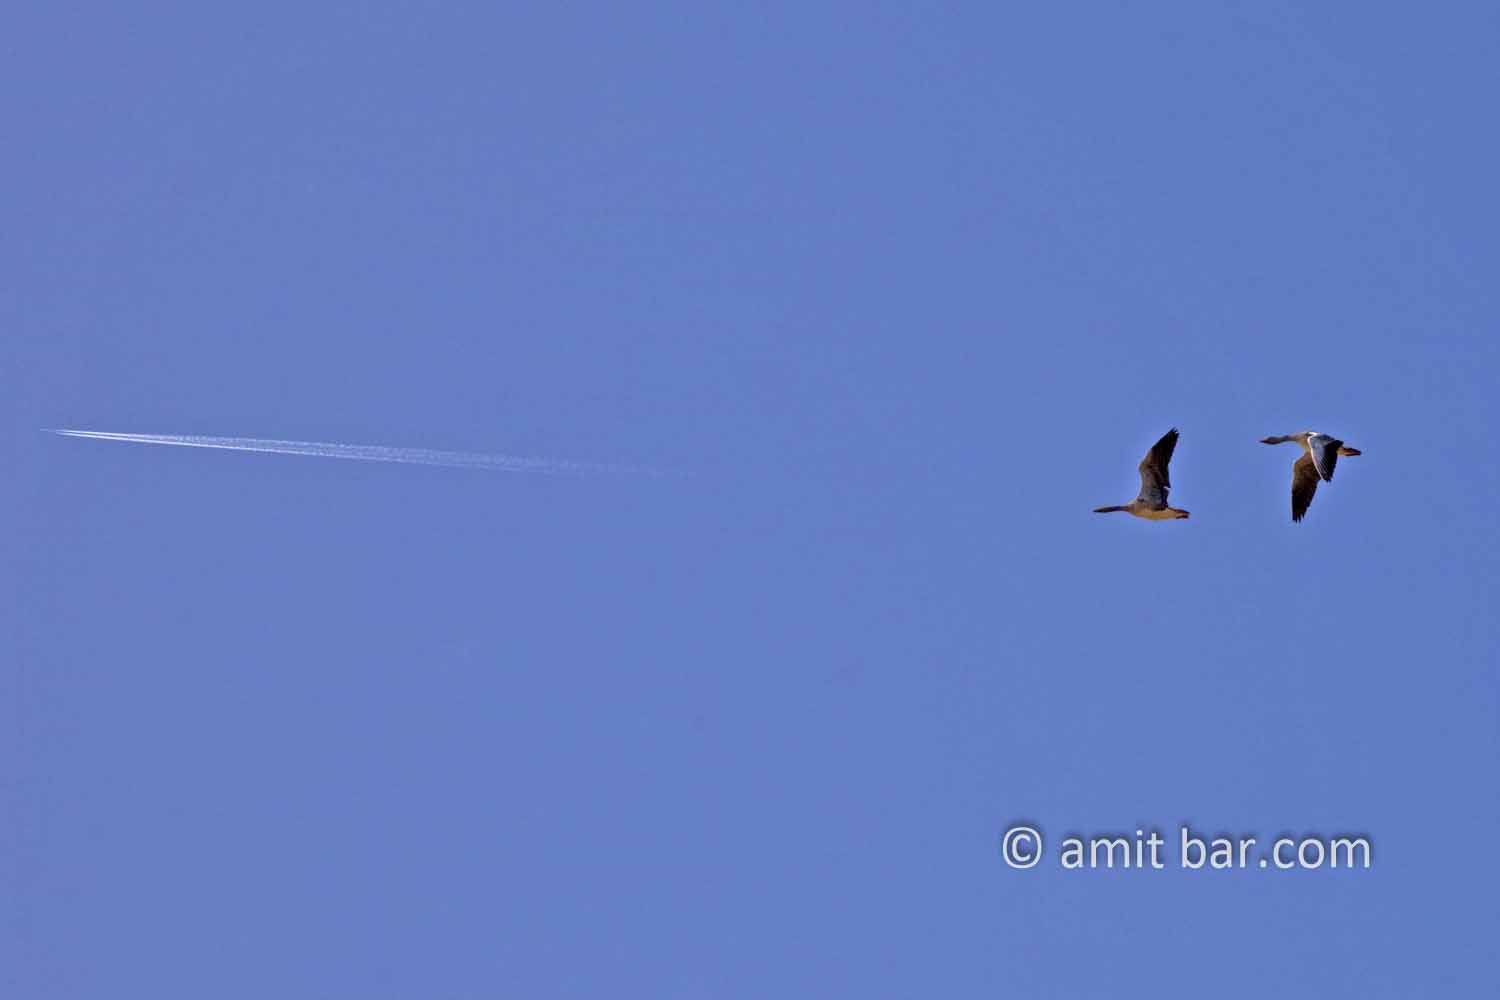 Leaving without a jetplane: Two geese flying behind an airplane